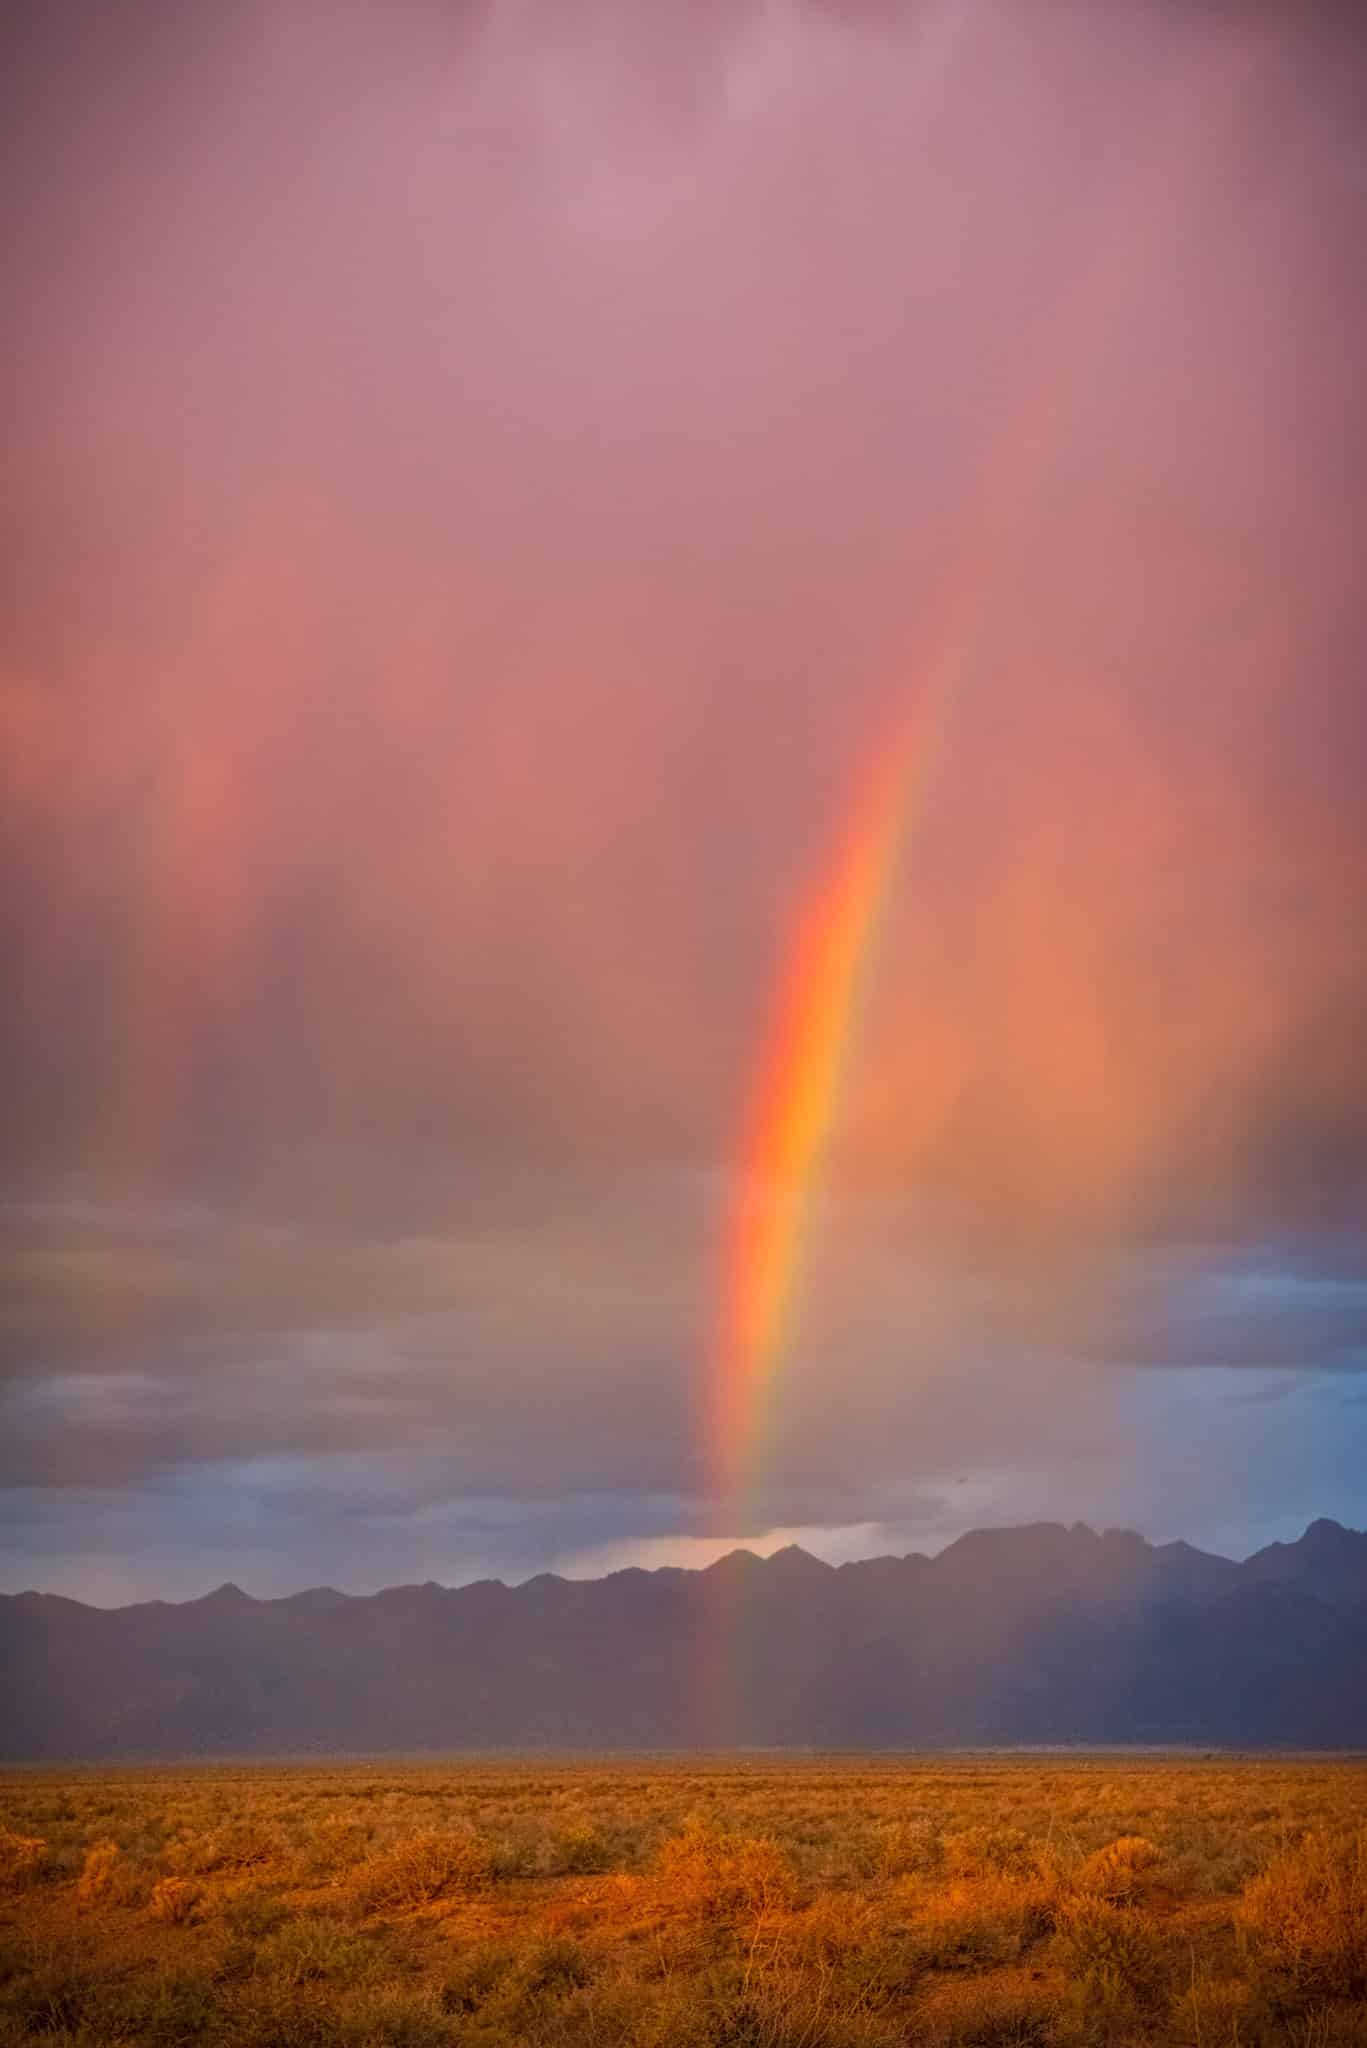 A brilliant rainbow emerges from the virga on the high plains near the Great Sand Dunes National Park and Preserve near Alamosa, Colorado.